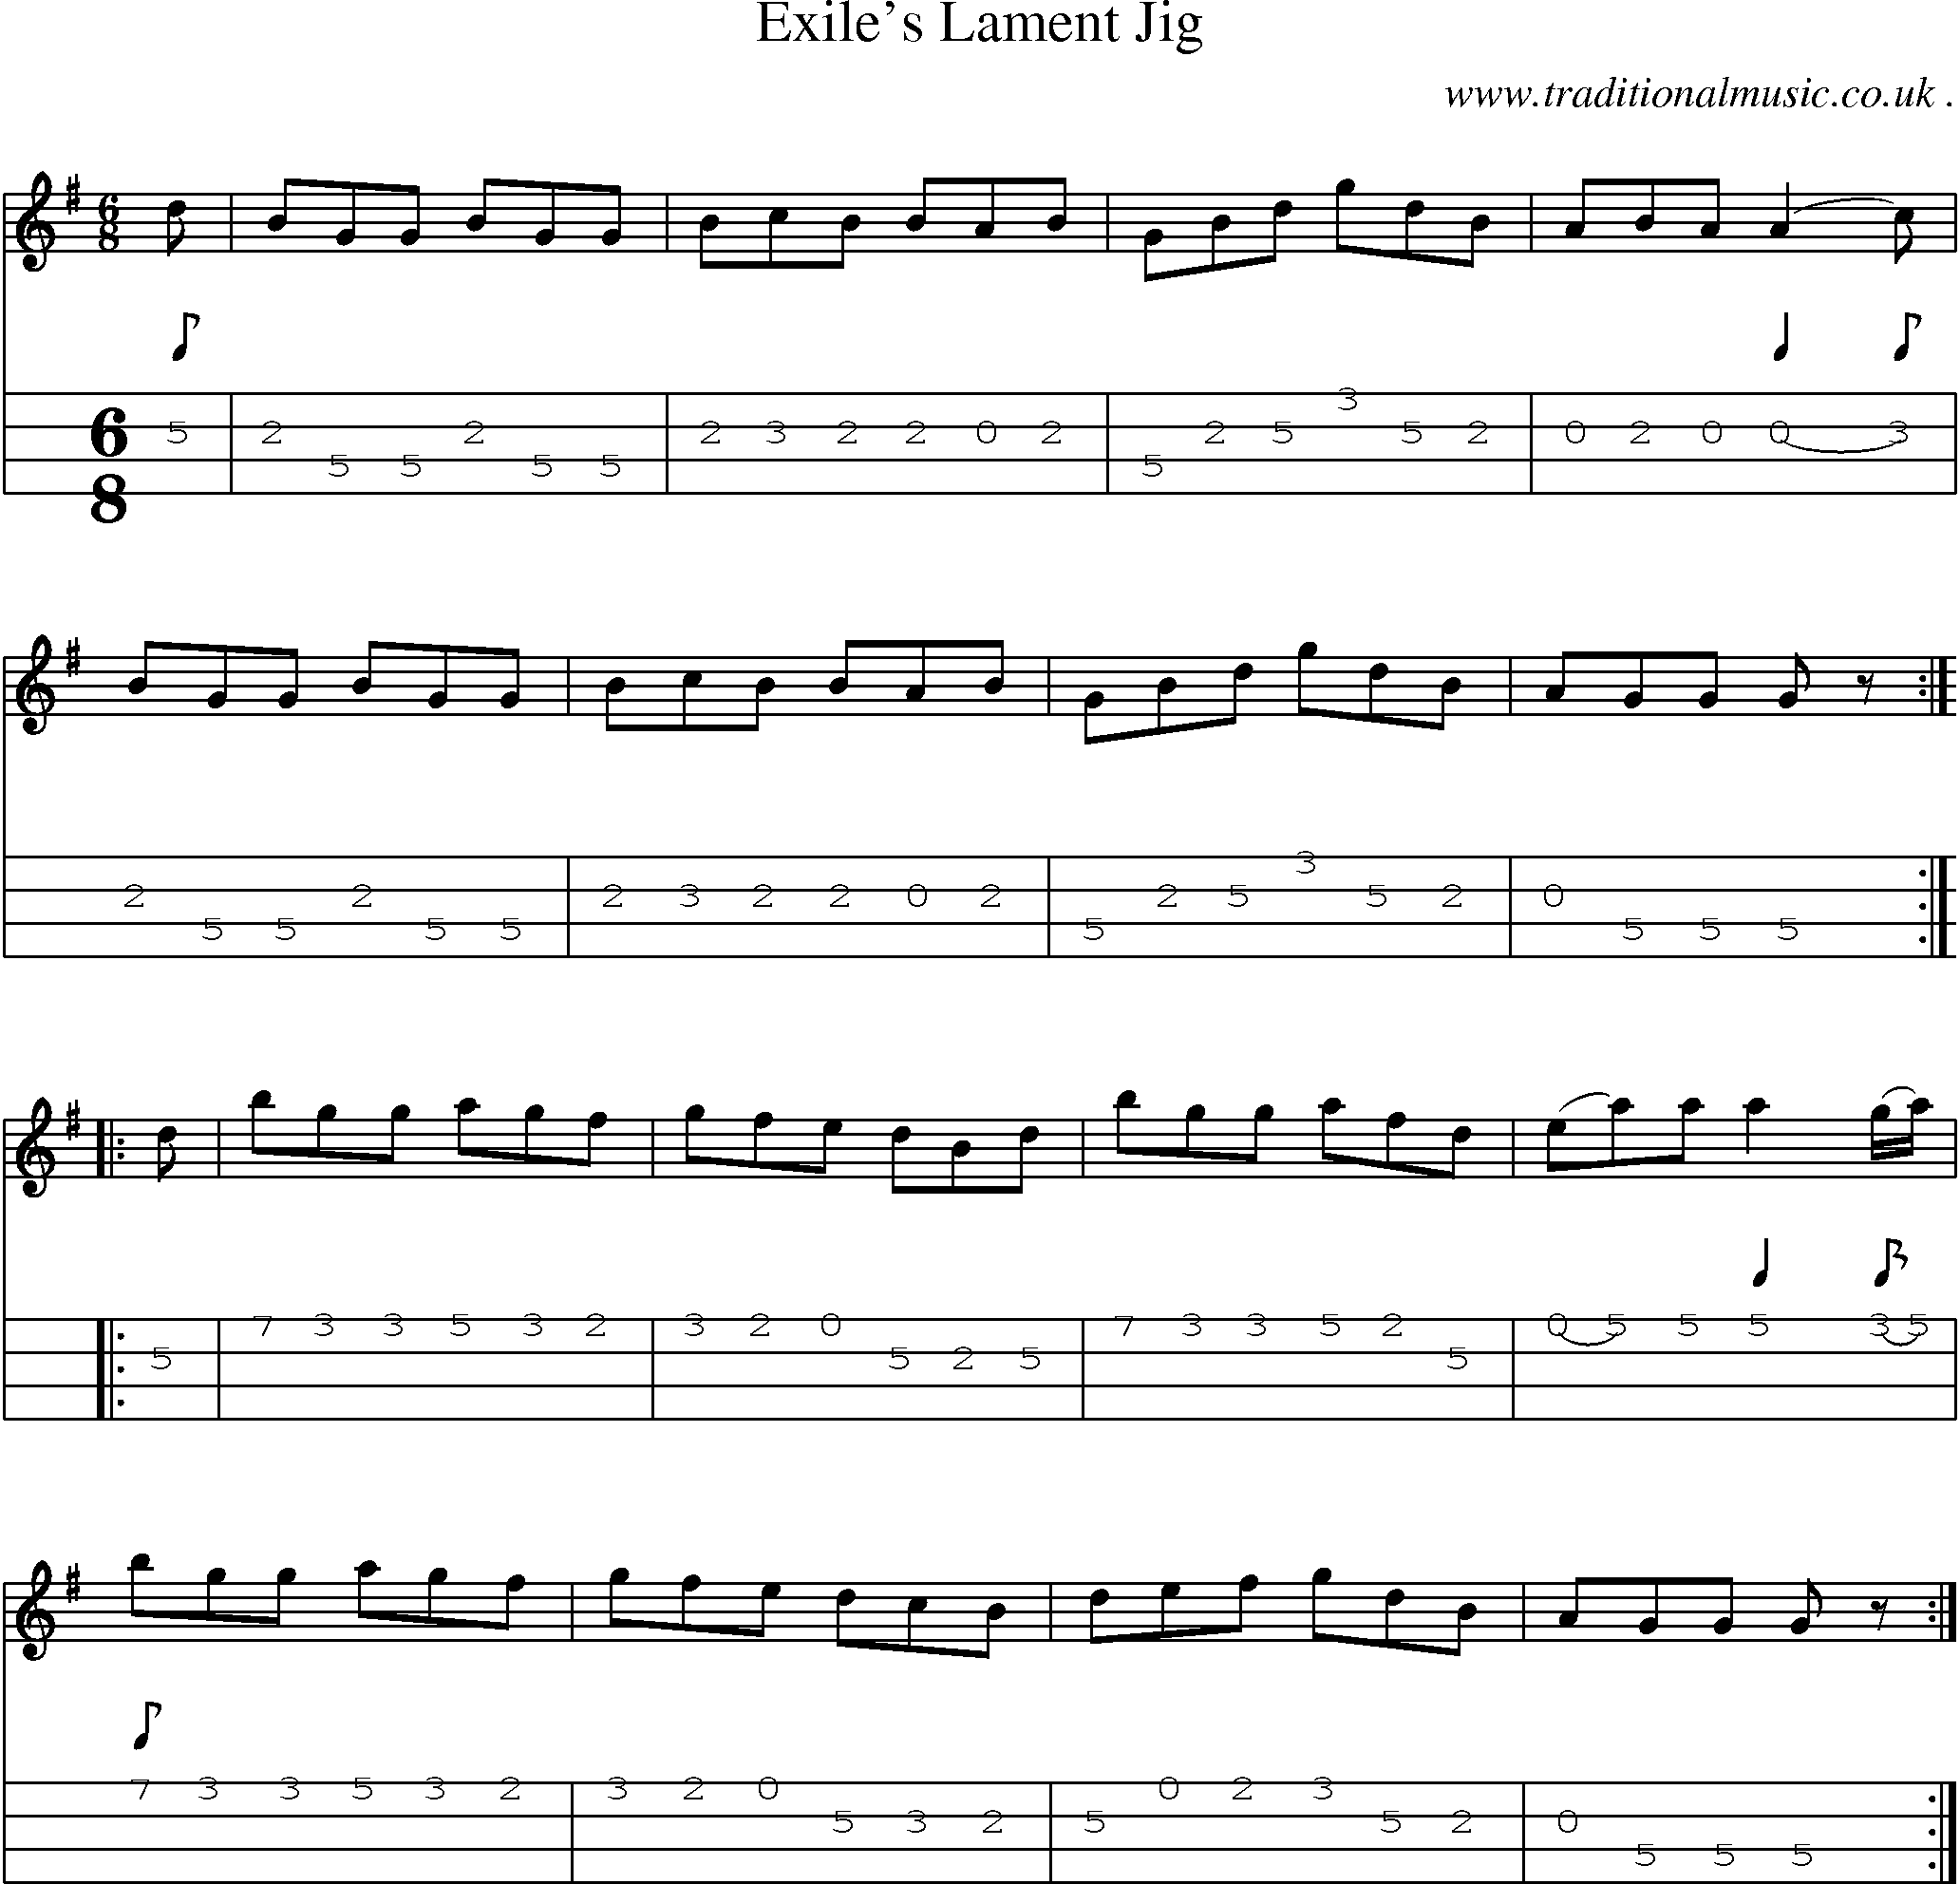 Sheet-Music and Mandolin Tabs for Exiles Lament Jig